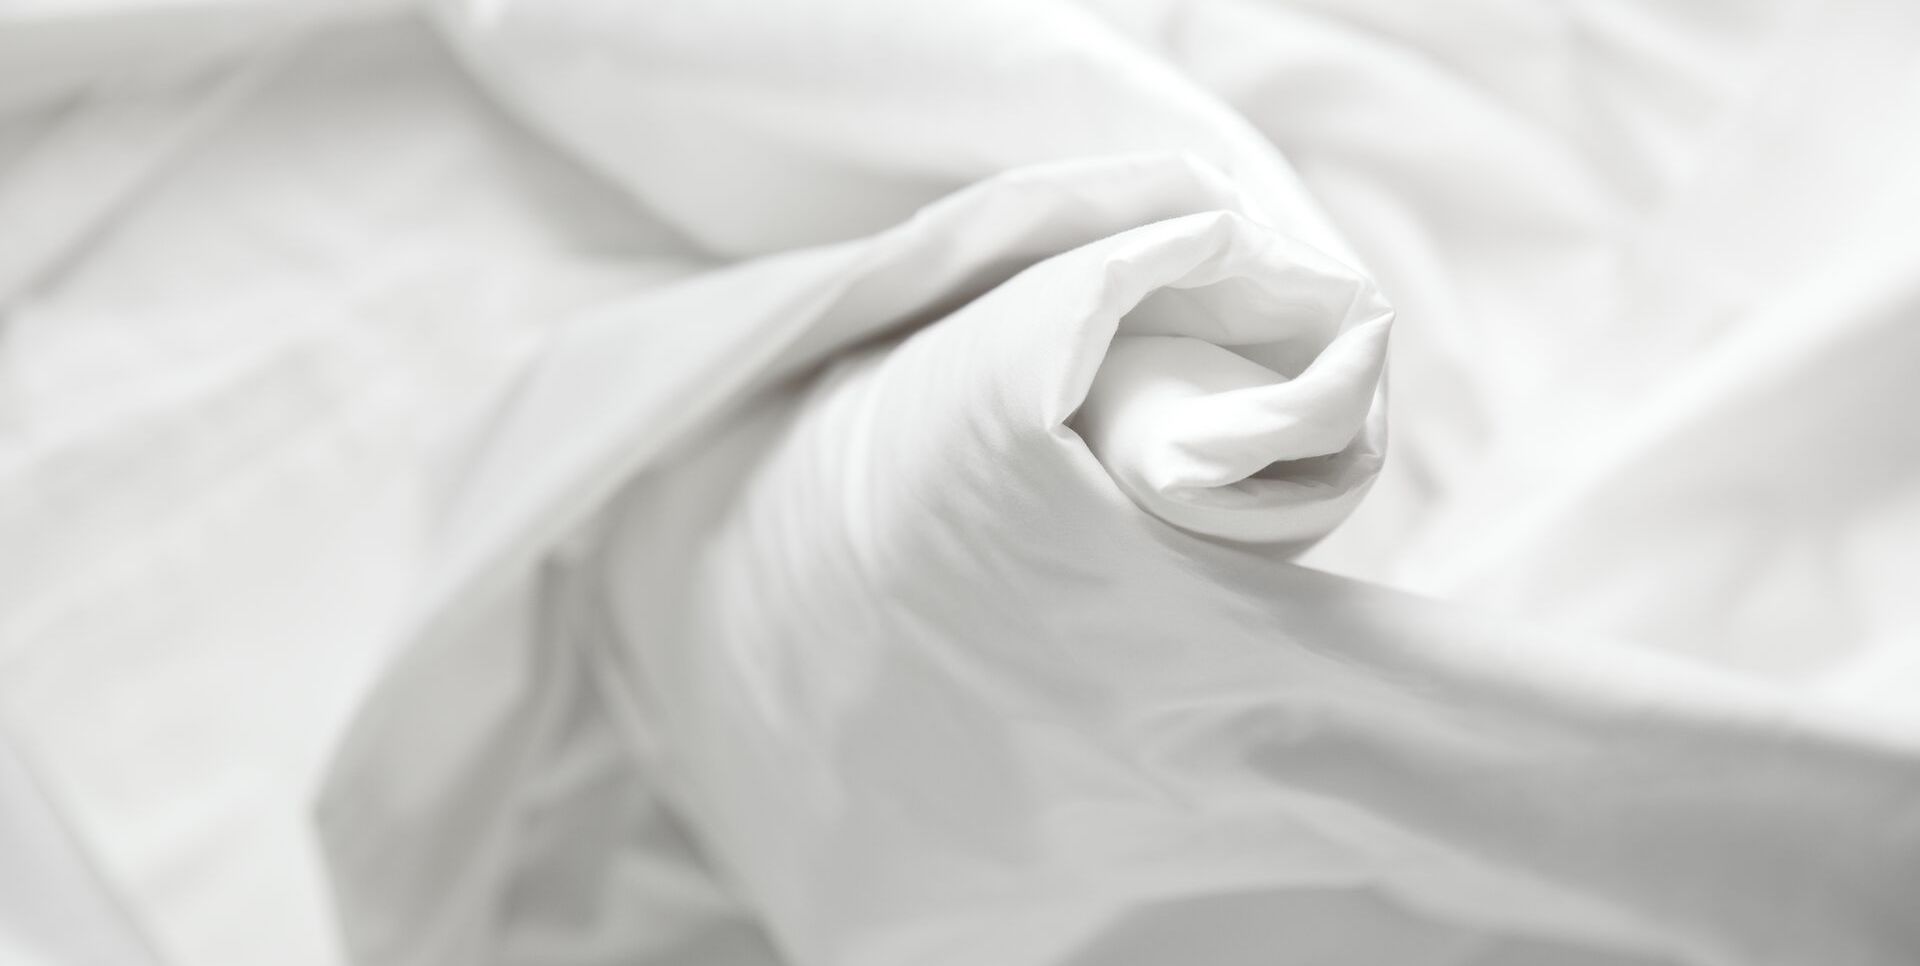 Organic Cotton Vs. Conventional Cotton: What's The Difference?